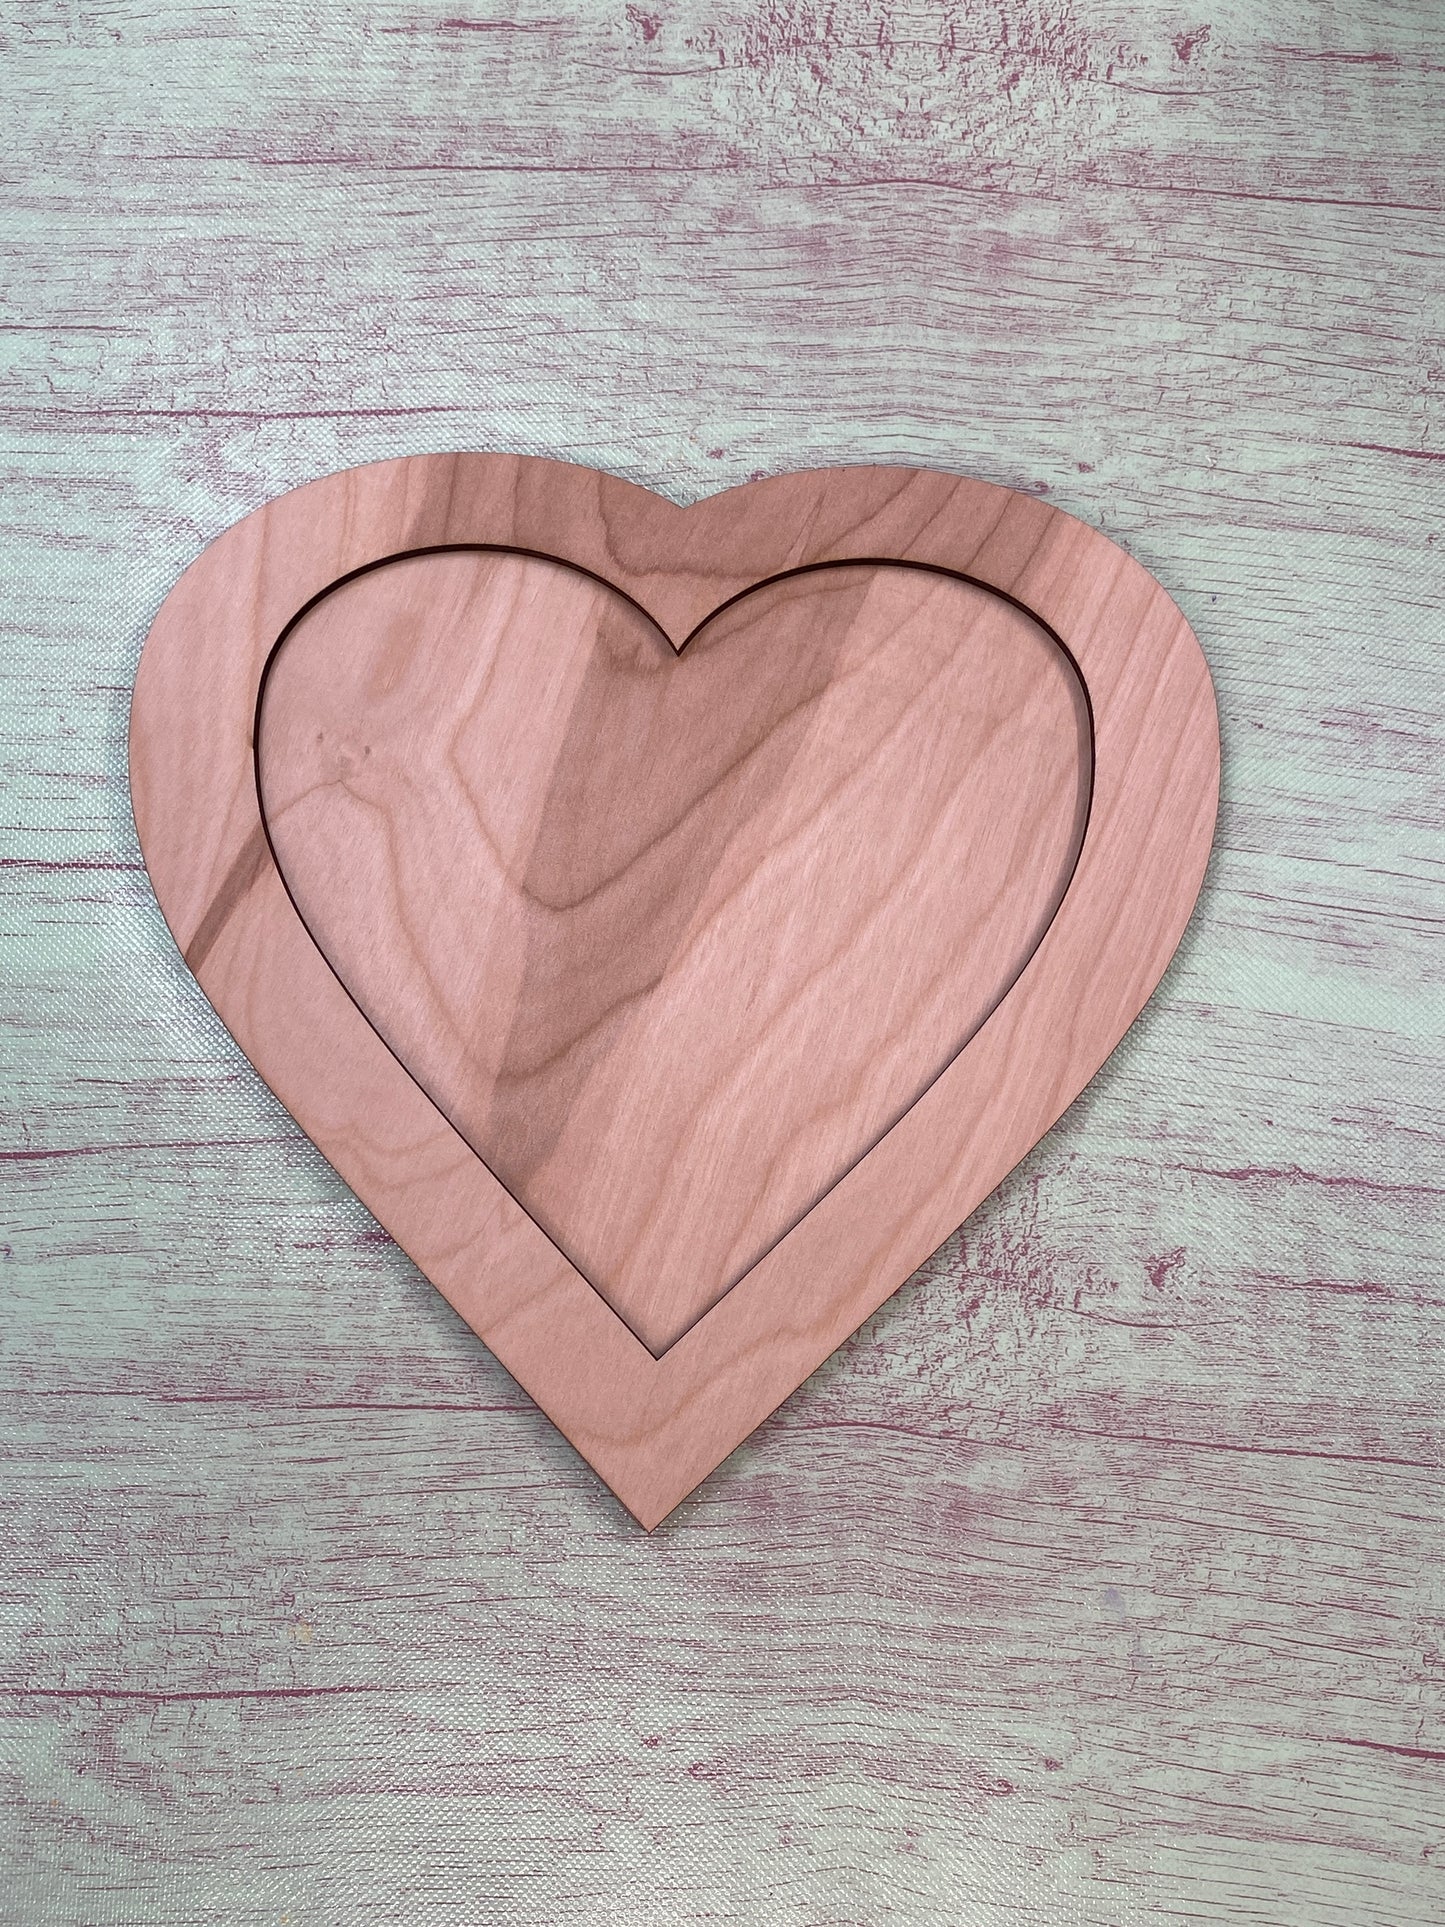 Framed Heart and Heart Shaped Window Laser Cut / Engraved Wooden Blank